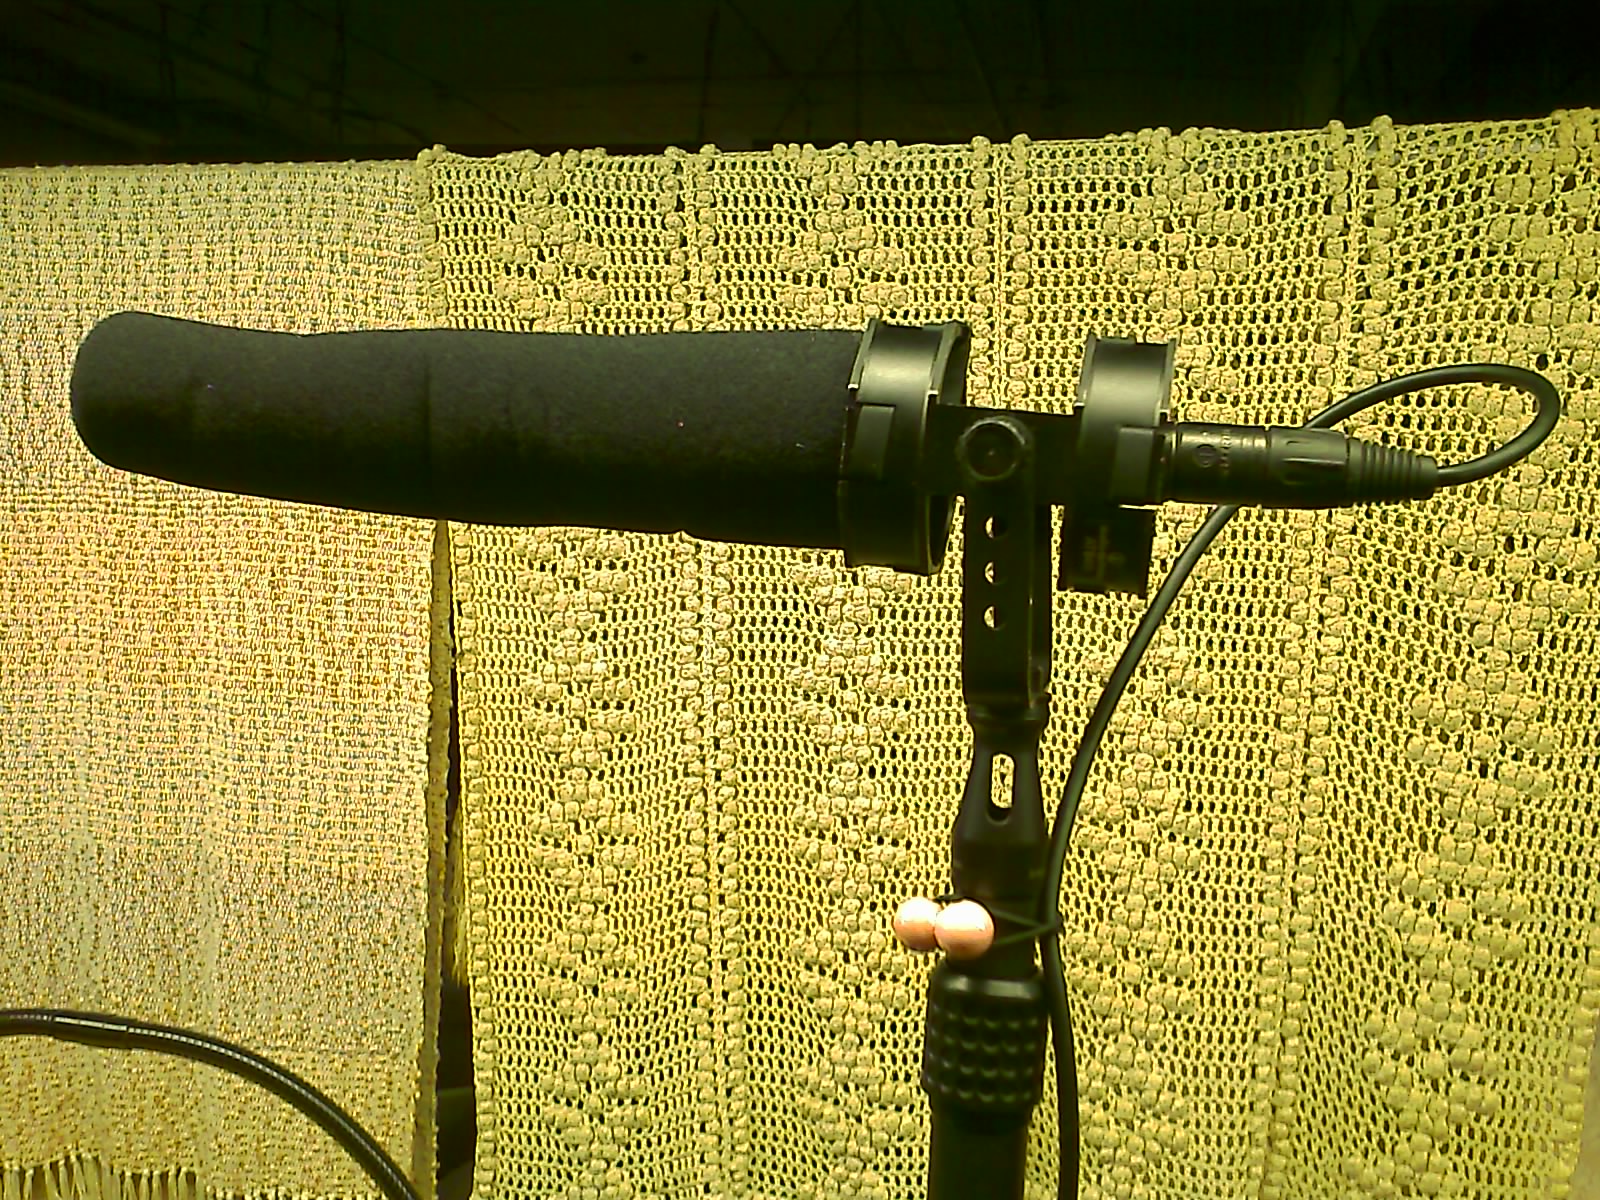 the bicycle is plugged in with a microphone